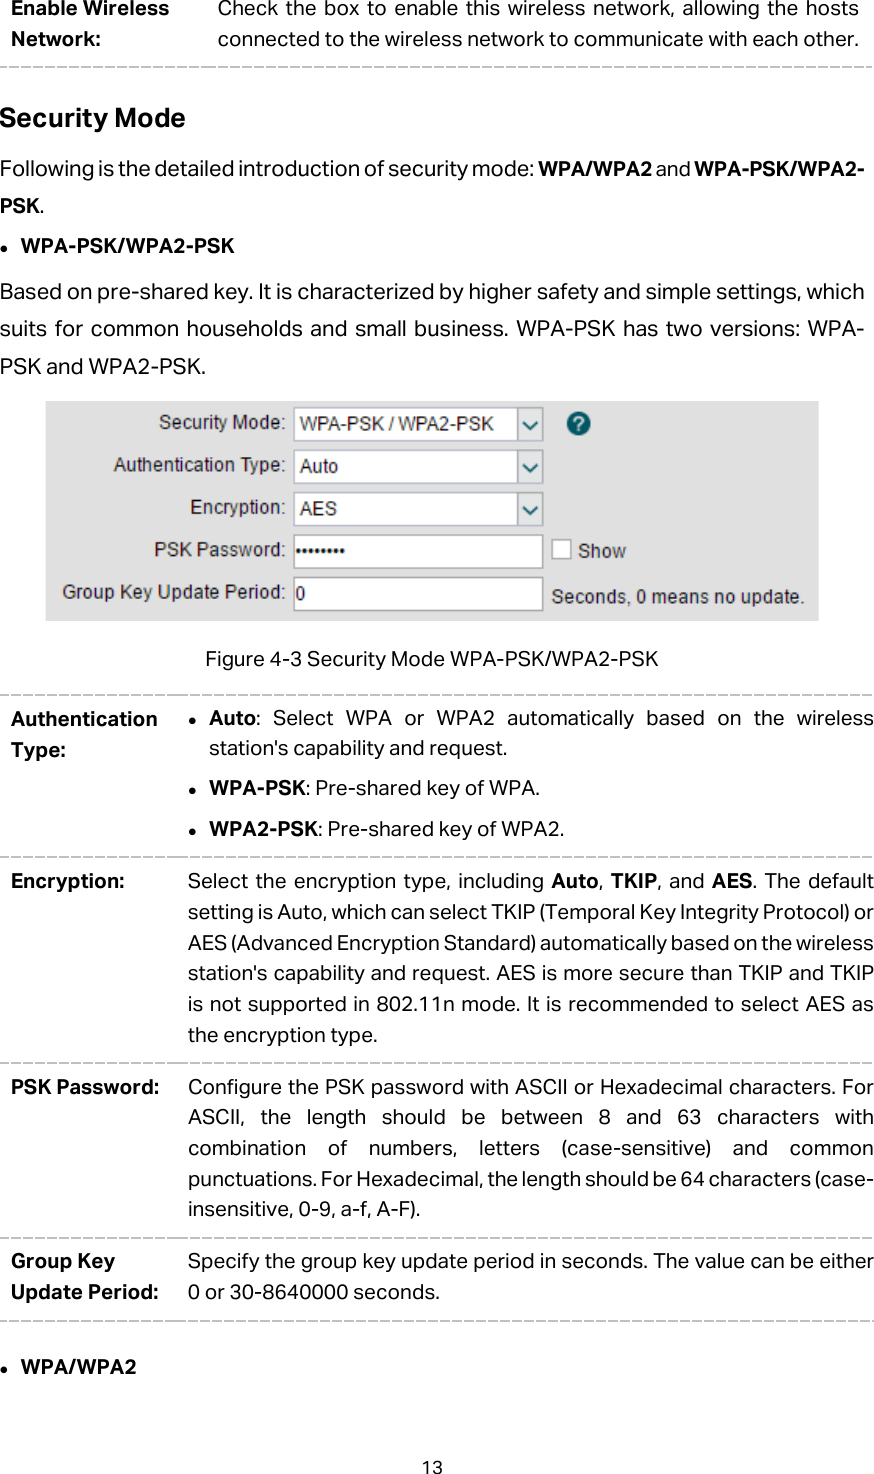 Enable Wireless Network: Check the box to enable this wireless network, allowing the hosts connected to the wireless network to communicate with each other. Security Mode Following is the detailed introduction of security mode: WPA/WPA2 and WPA-PSK/WPA2-PSK.  WPA-PSK/WPA2-PSK Based on pre-shared key. It is characterized by higher safety and simple settings, which suits for common households and small business. WPA-PSK has two versions: WPA-PSK and WPA2-PSK.    Figure 4-3 Security Mode WPA-PSK/WPA2-PSK Authentication Type:  Auto: Select WPA or WPA2 automatically based on the wireless station&apos;s capability and request.  WPA-PSK: Pre-shared key of WPA.  WPA2-PSK: Pre-shared key of WPA2. Encryption:  Select the encryption type, including Auto,  TKIP, and AES. The default setting is Auto, which can select TKIP (Temporal Key Integrity Protocol) or AES (Advanced Encryption Standard) automatically based on the wireless station&apos;s capability and request. AES is more secure than TKIP and TKIP is not supported in 802.11n mode. It is recommended to select AES as the encryption type. PSK Password: Configure the PSK password with ASCII or Hexadecimal characters. For ASCII, the length should be between 8 and 63 characters with combination of numbers, letters (case-sensitive) and common punctuations. For Hexadecimal, the length should be 64 characters (case-insensitive, 0-9, a-f, A-F).   Group Key Update Period: Specify the group key update period in seconds. The value can be either 0 or 30-8640000 seconds.  WPA/WPA2 13 